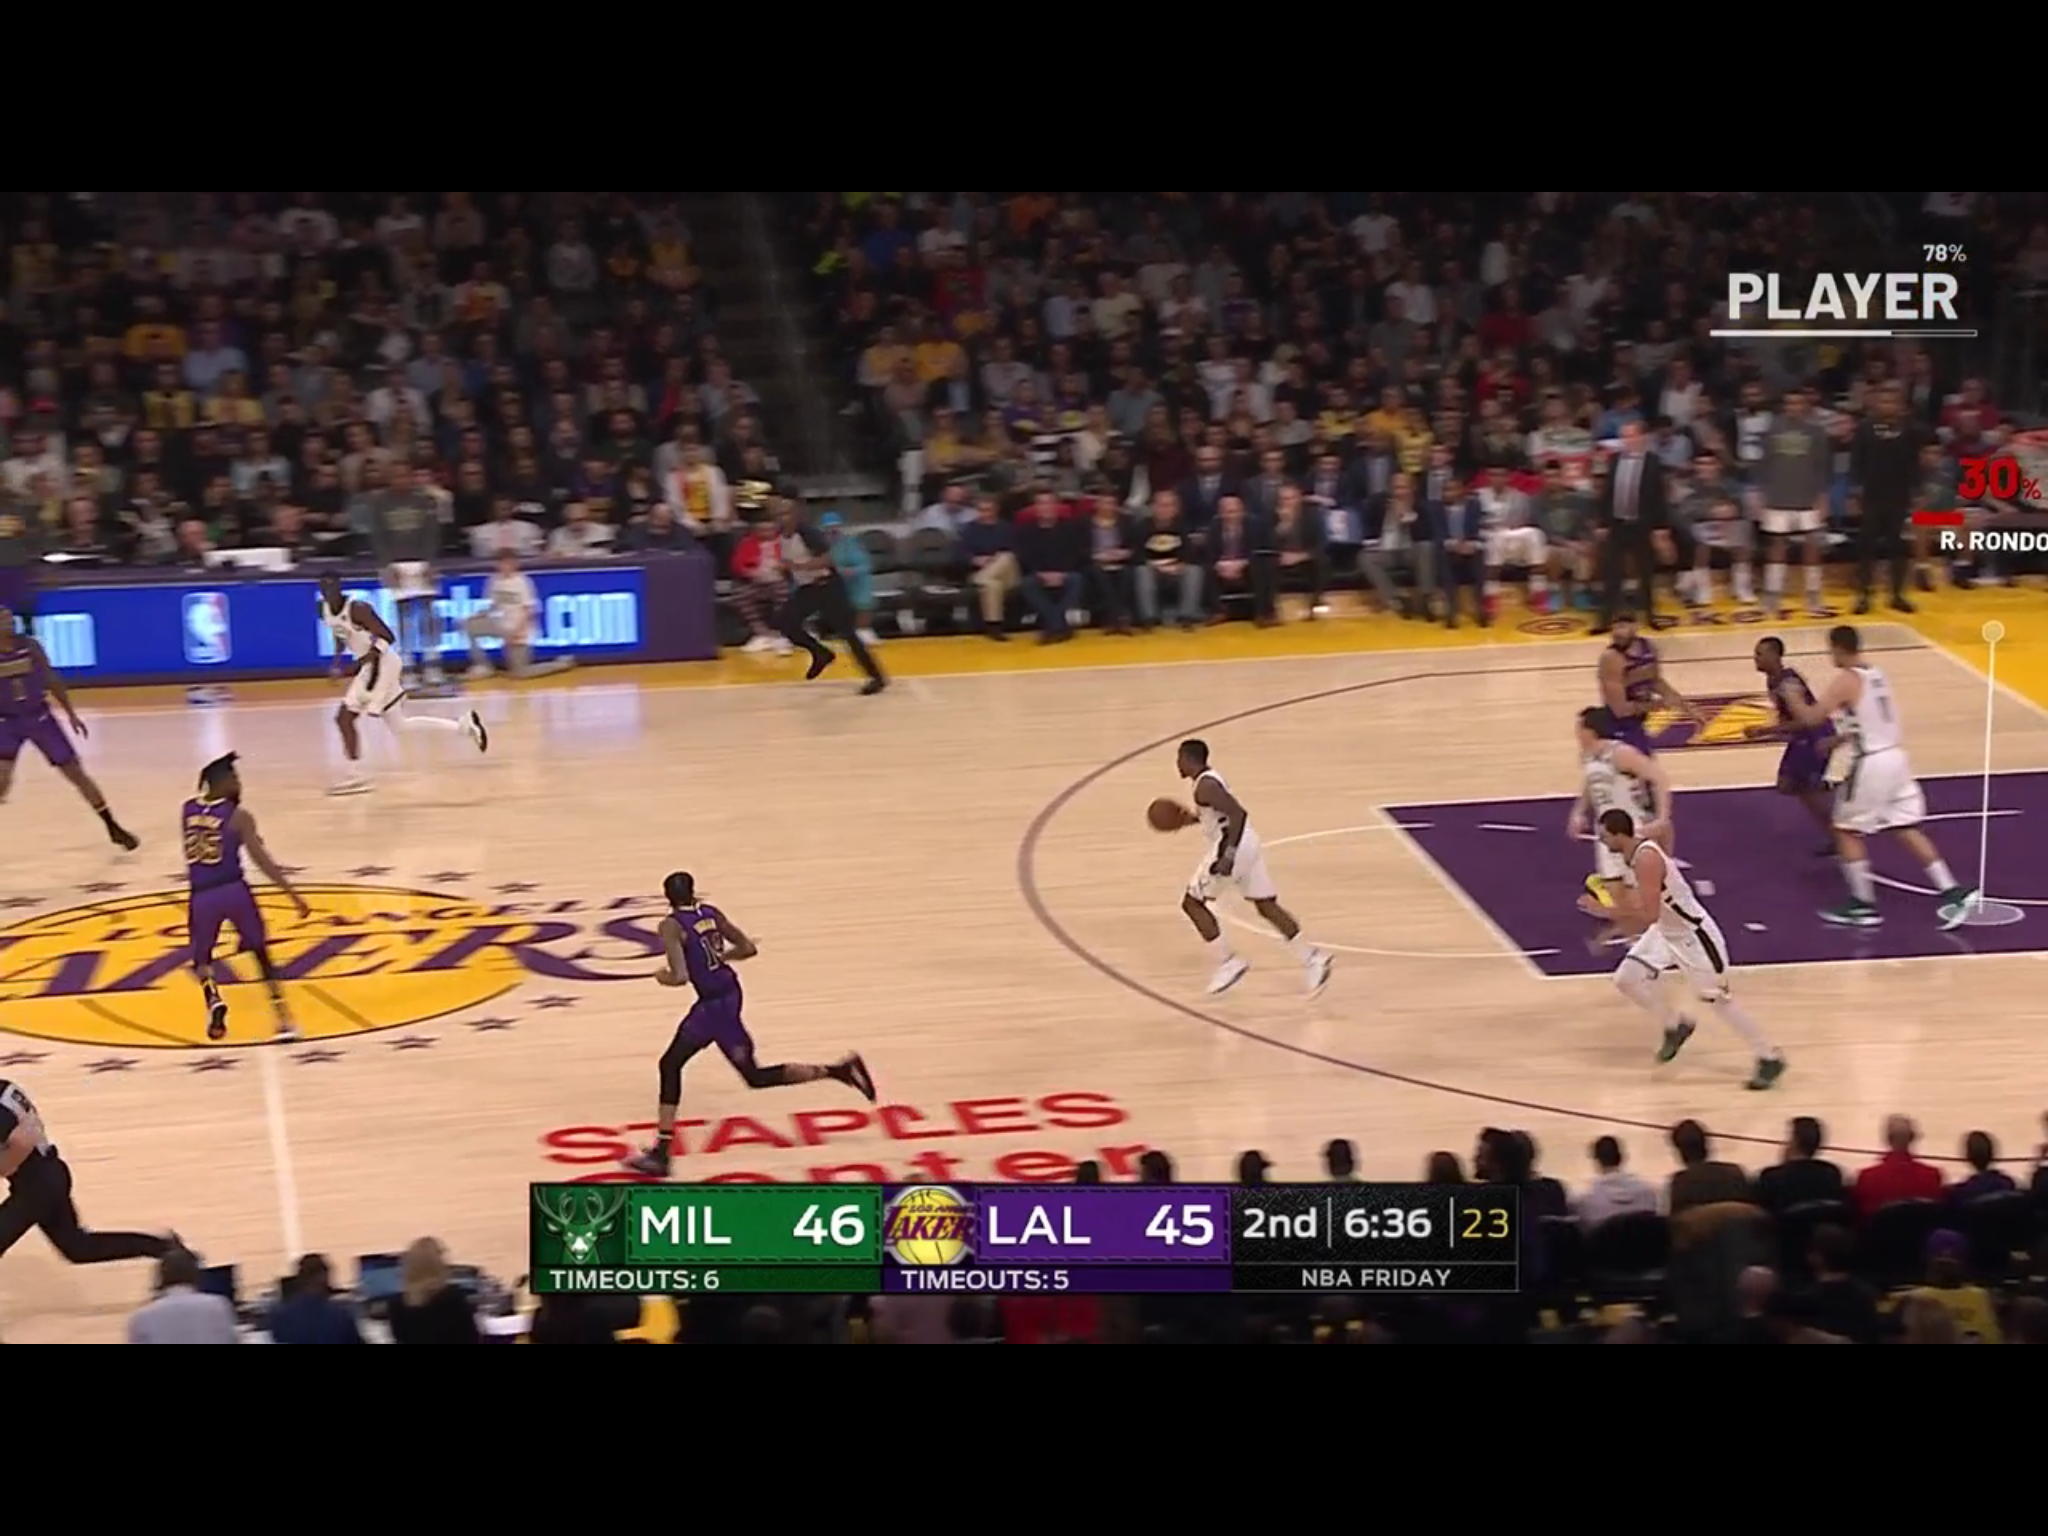  Player missed the shot with red percentage graphic  